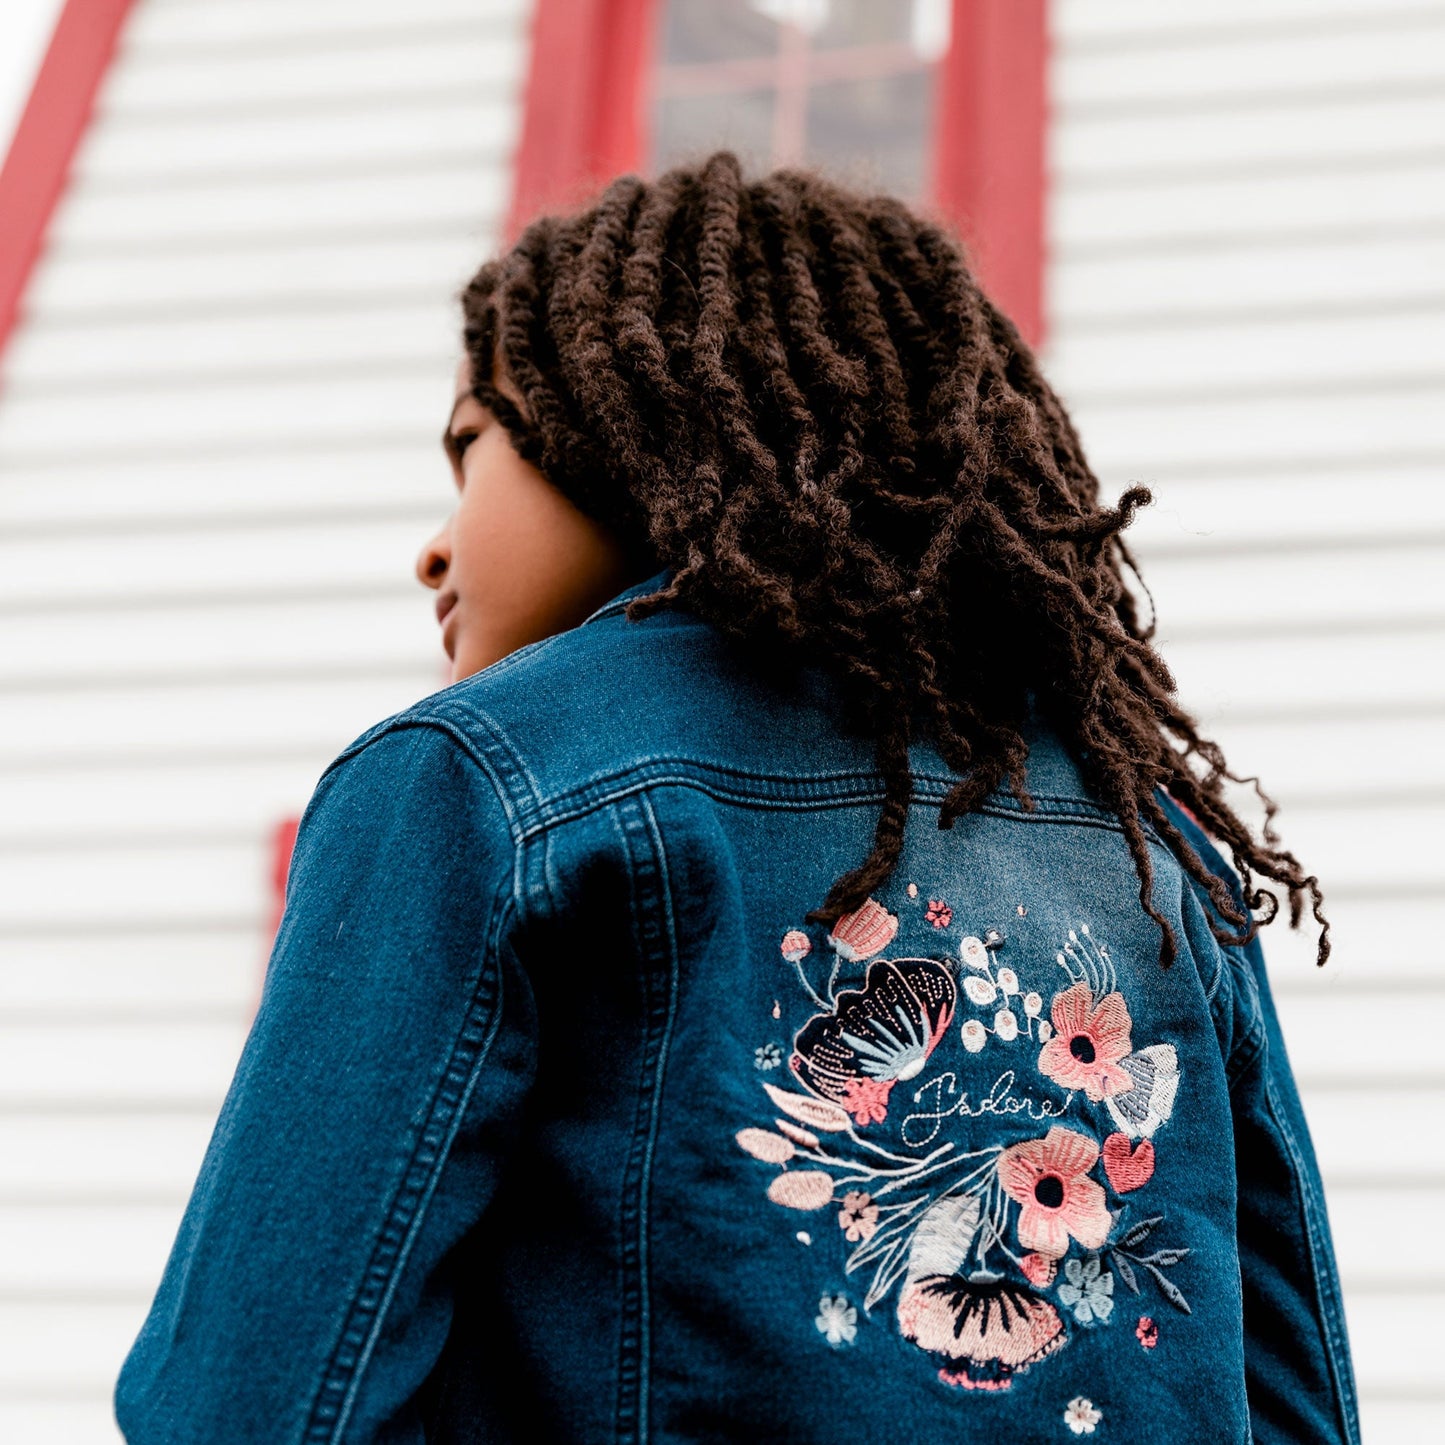 Denim Jacket With Embroidery